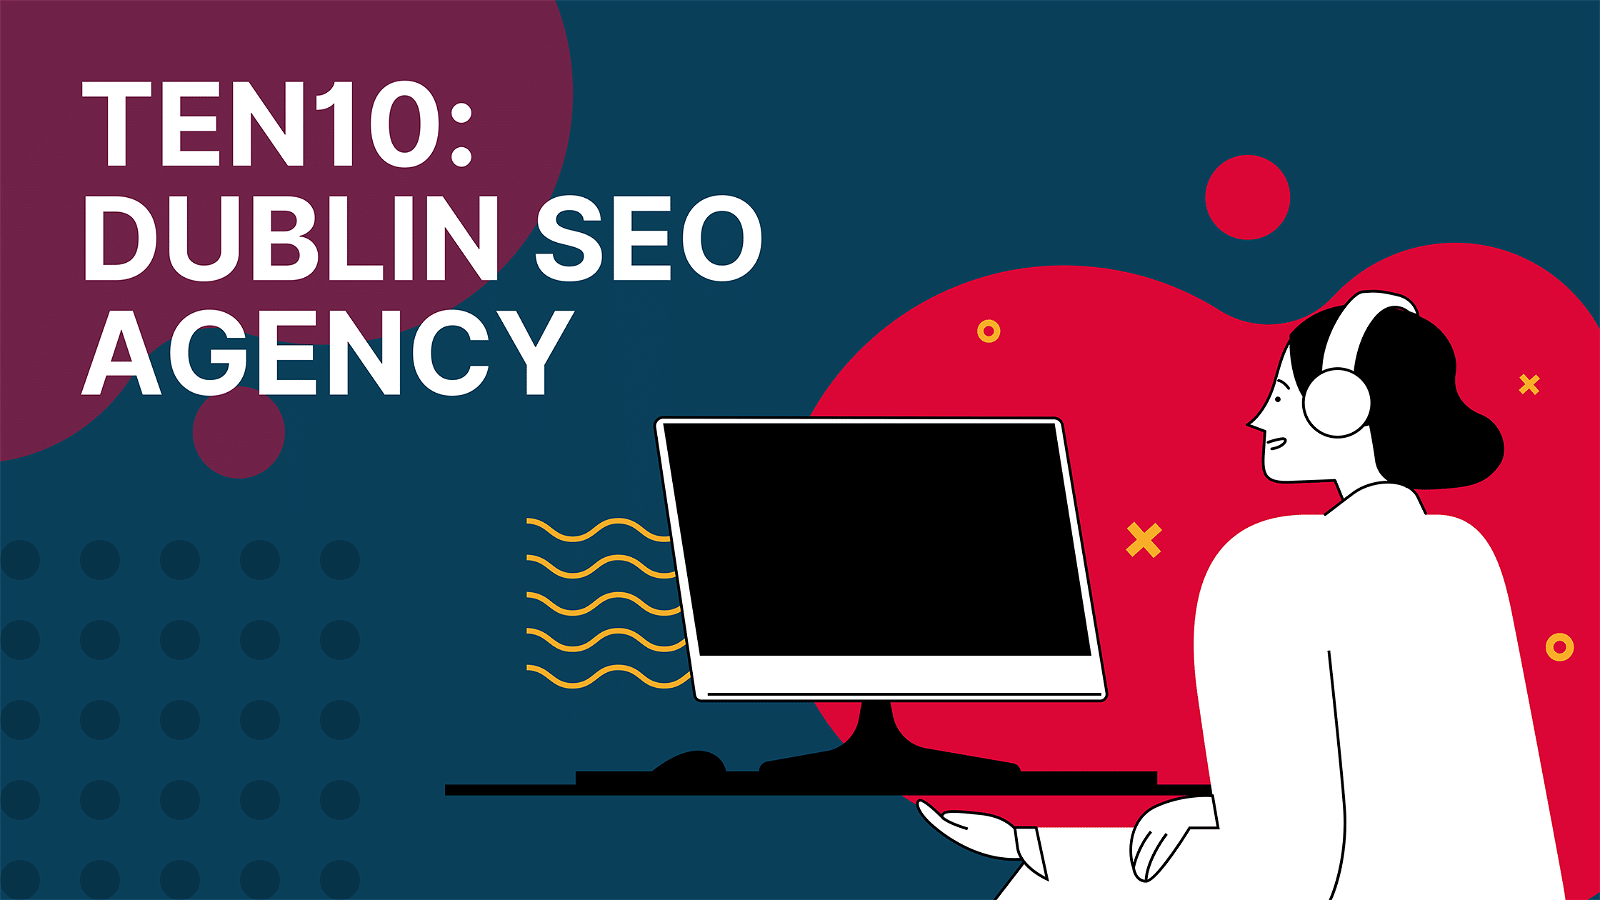 A Dublin SEO agency is being represented by a logo featuring the number 10 and two Xs.